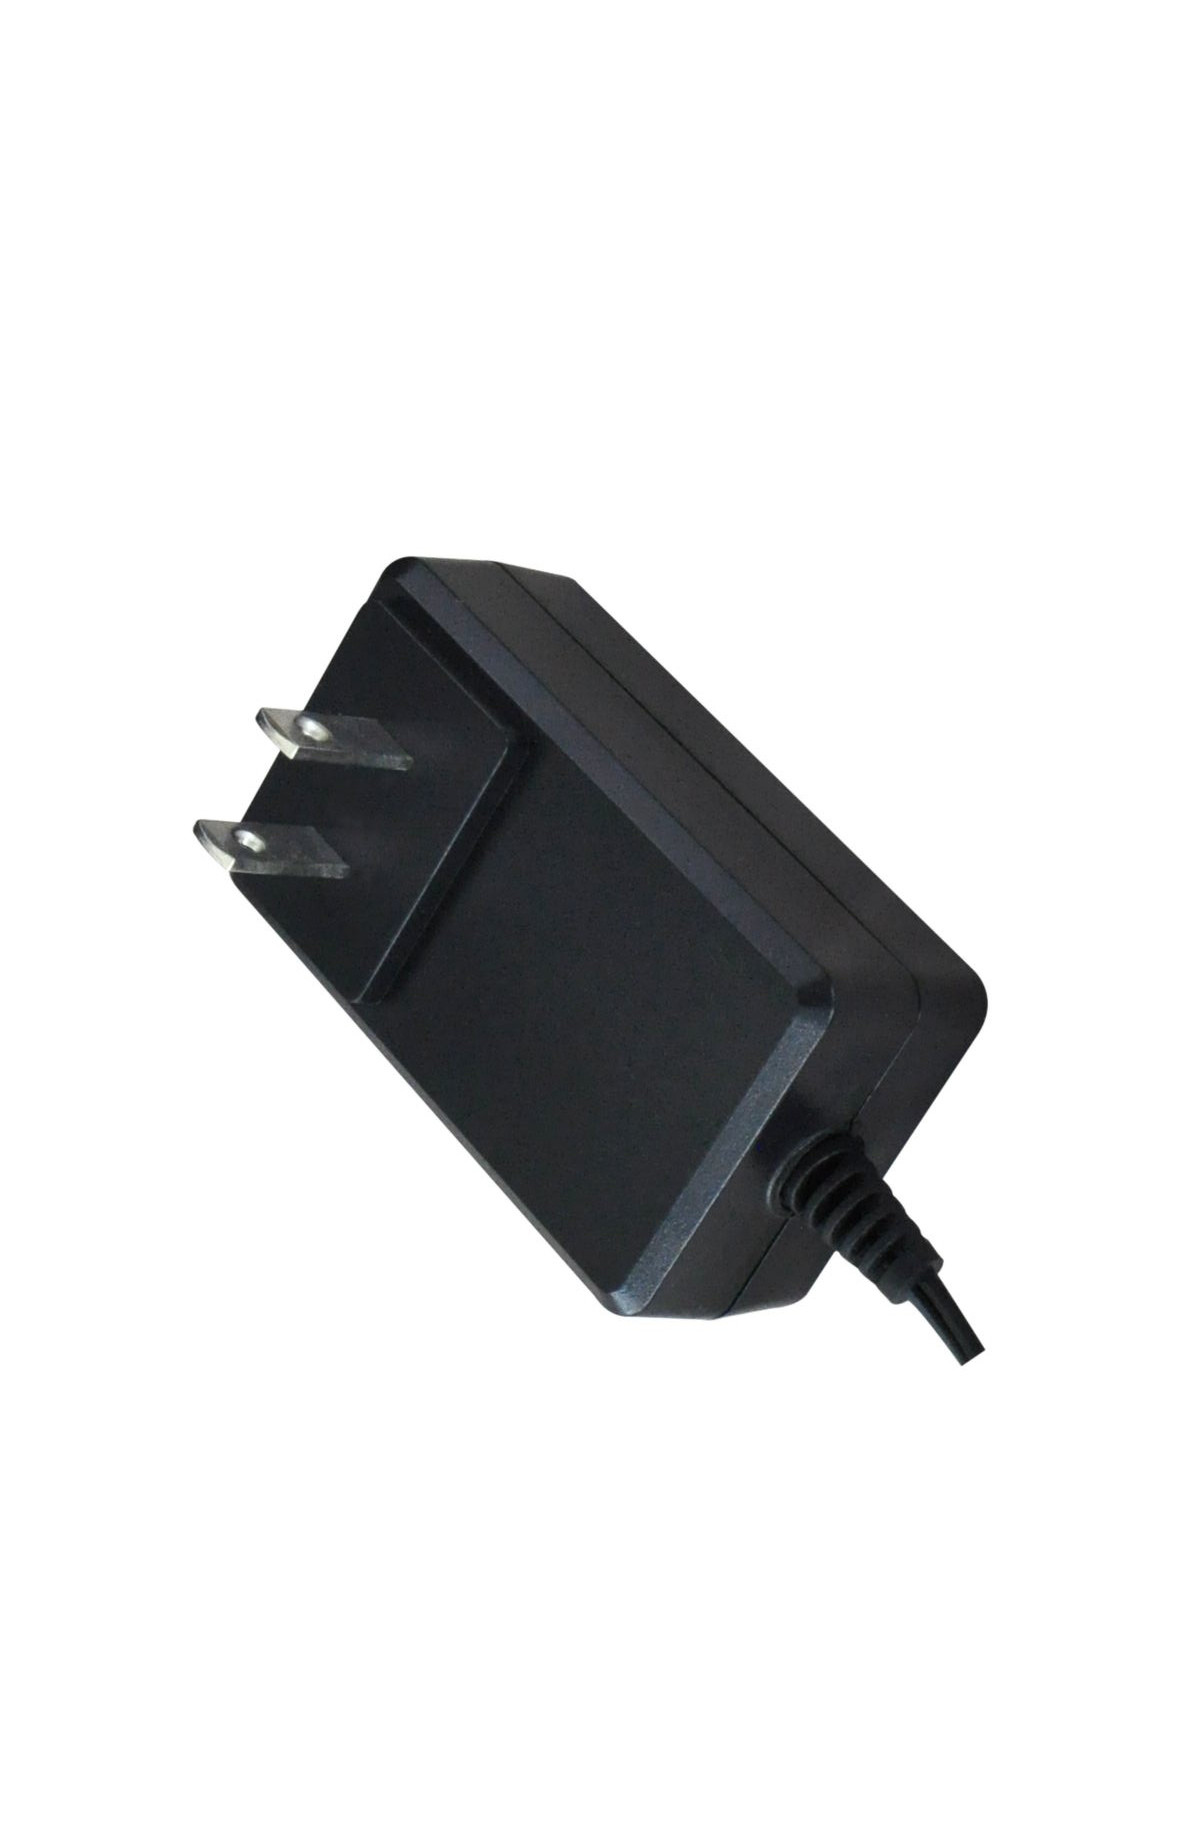 Wholesale Output 600mA 12W 19V DC Power Adapter ETL Certified Home Use from china suppliers